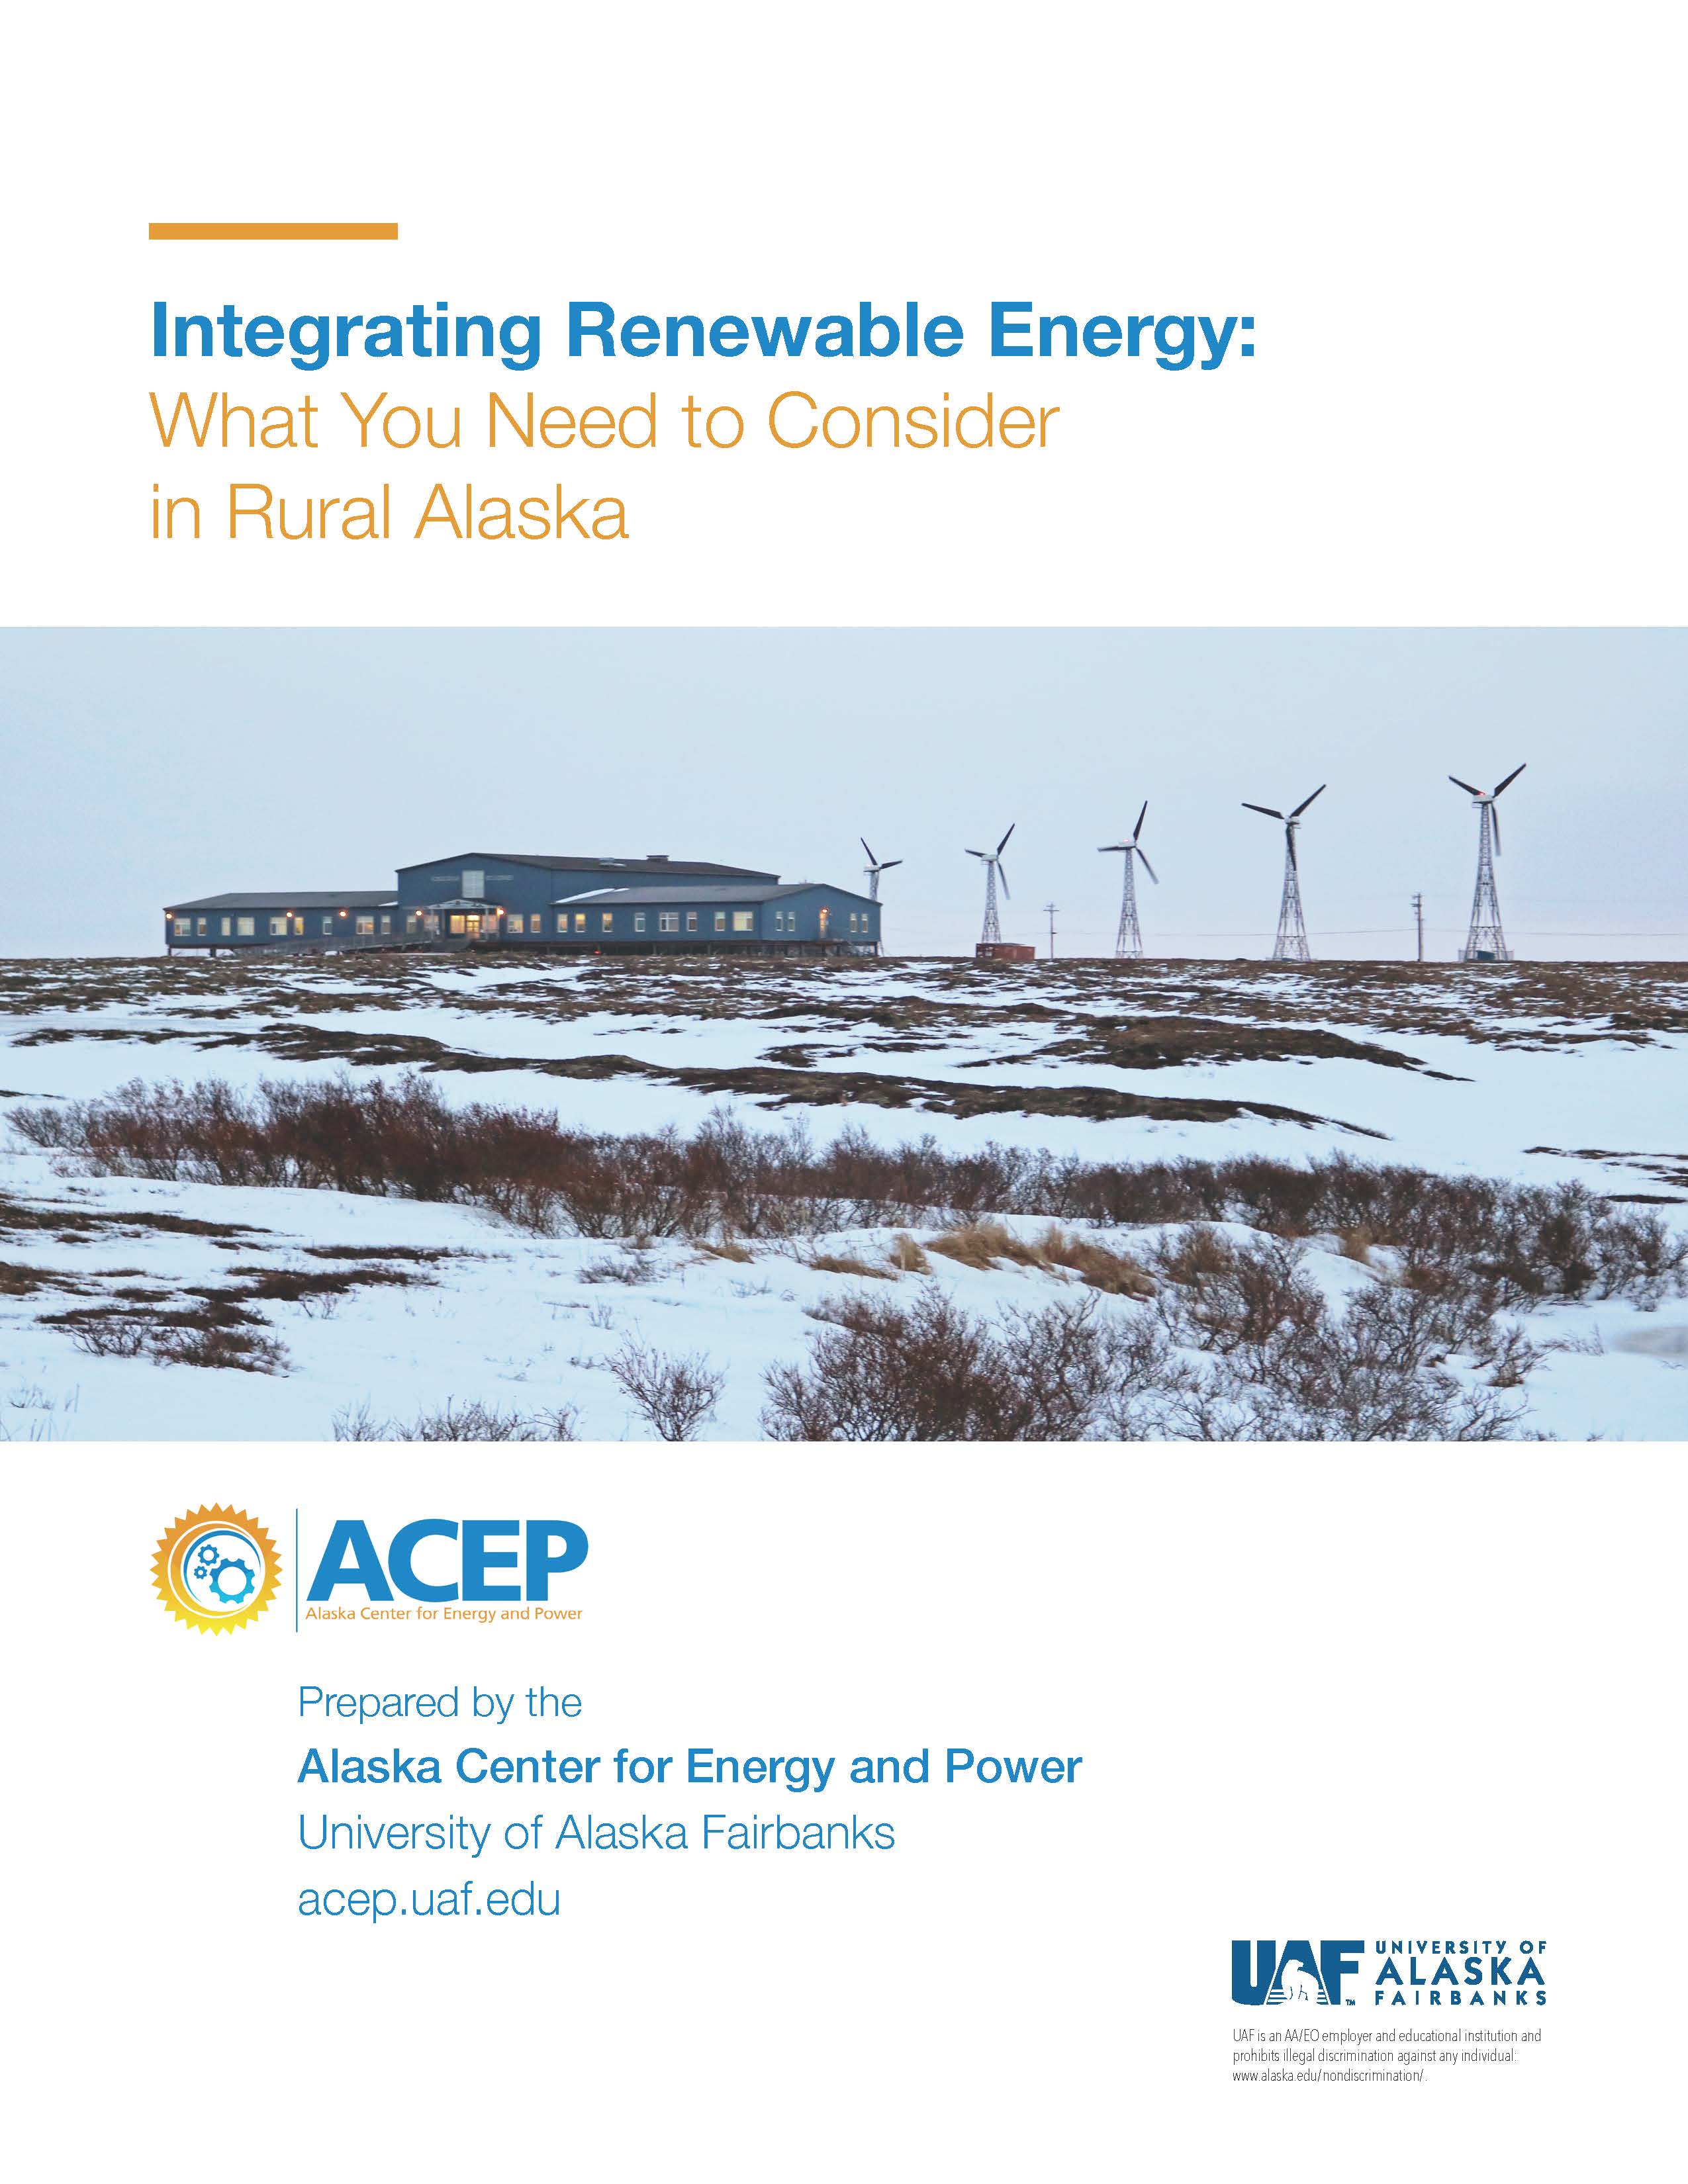 New Report Shares Costs and Challenges of Renewable Energy Options